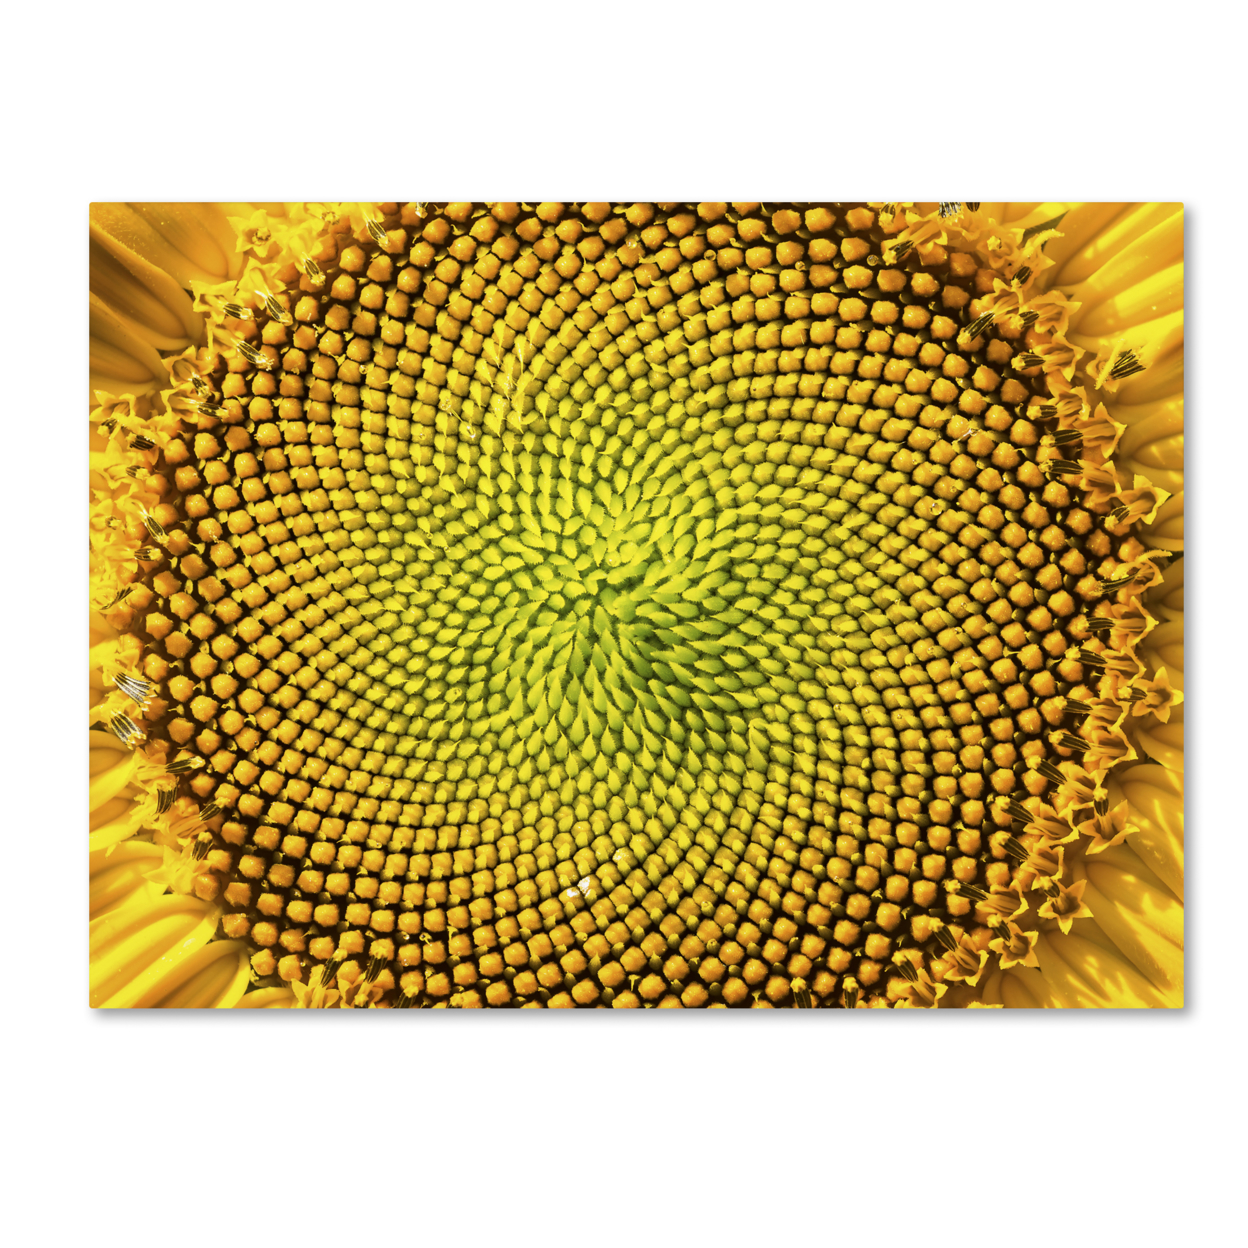 Kurt Shaffer 'Cosmic Patterns In Nature' Canvas Wall Art 35 X 47 Inches